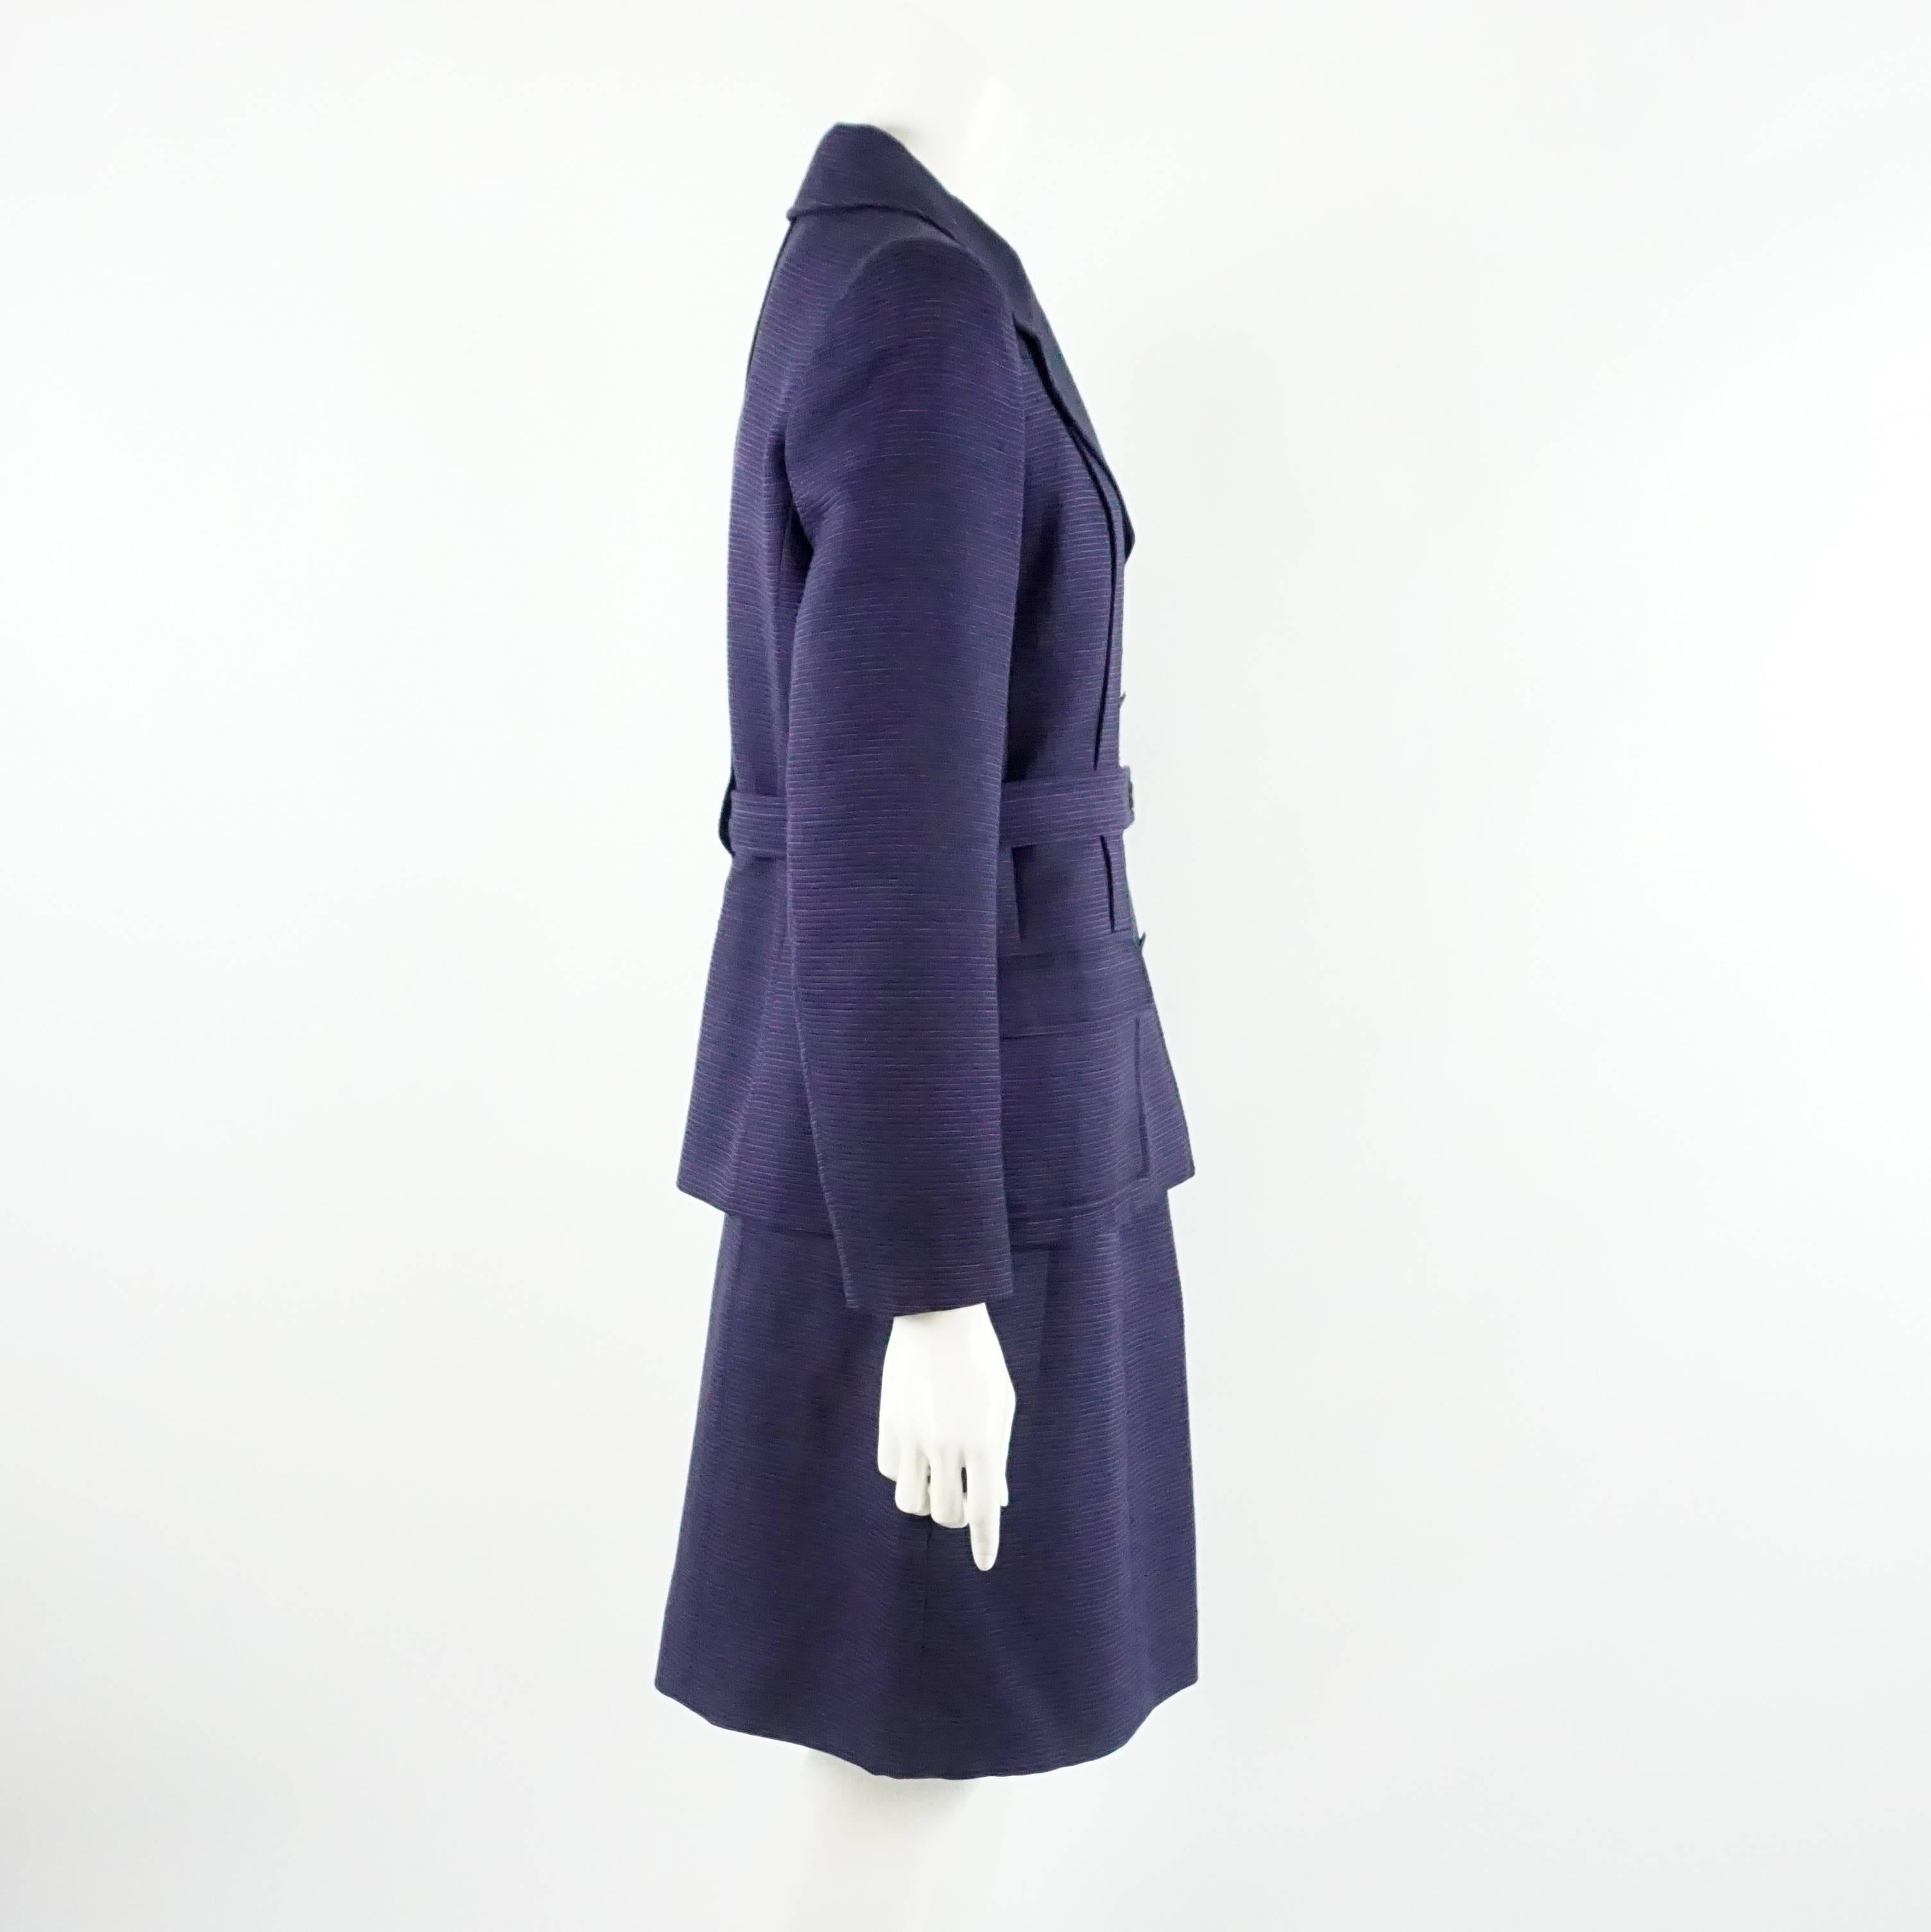 Chanel Purple Two Toned Wool/Silk Blend Ribbed Skirt Suit - Size 40. This vintage skirt suit is a made of a deep purple wool fabric that has a thin lighter purple horizontal pinstripe detail. The fully silk lined jacket has a fitted style with a 2